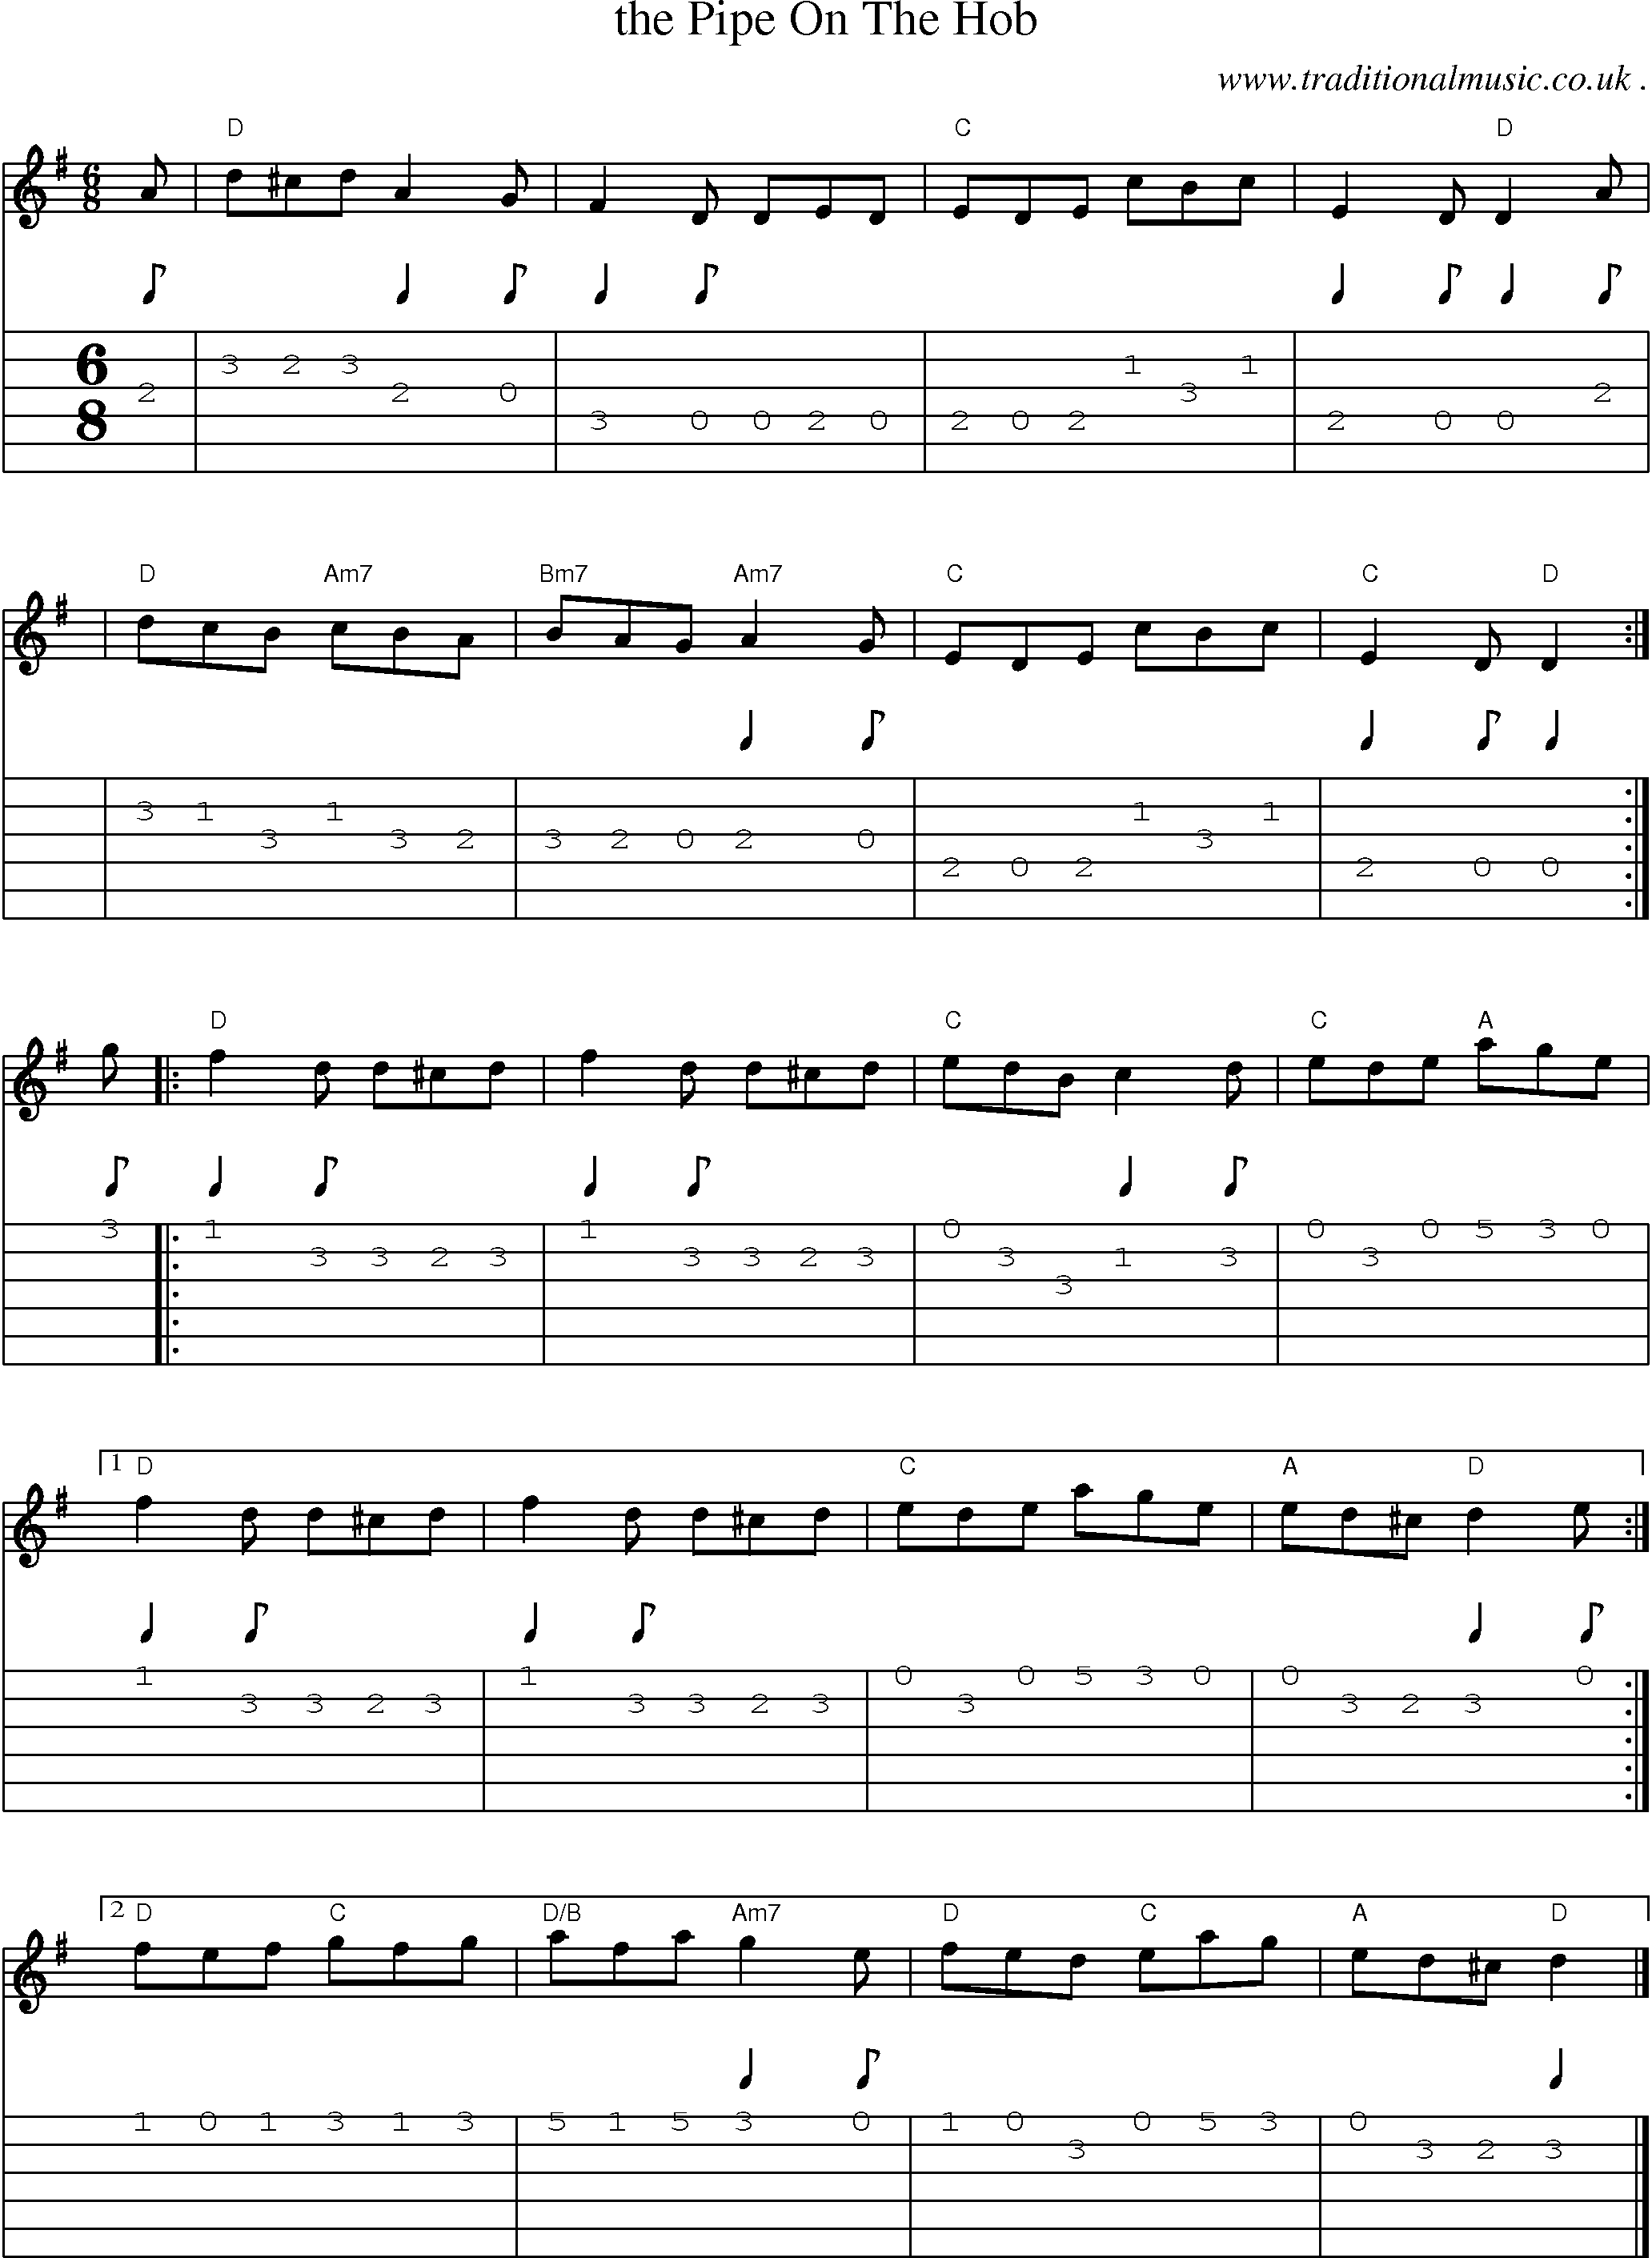 Sheet-music  score, Chords and Guitar Tabs for The Pipe On The Hob